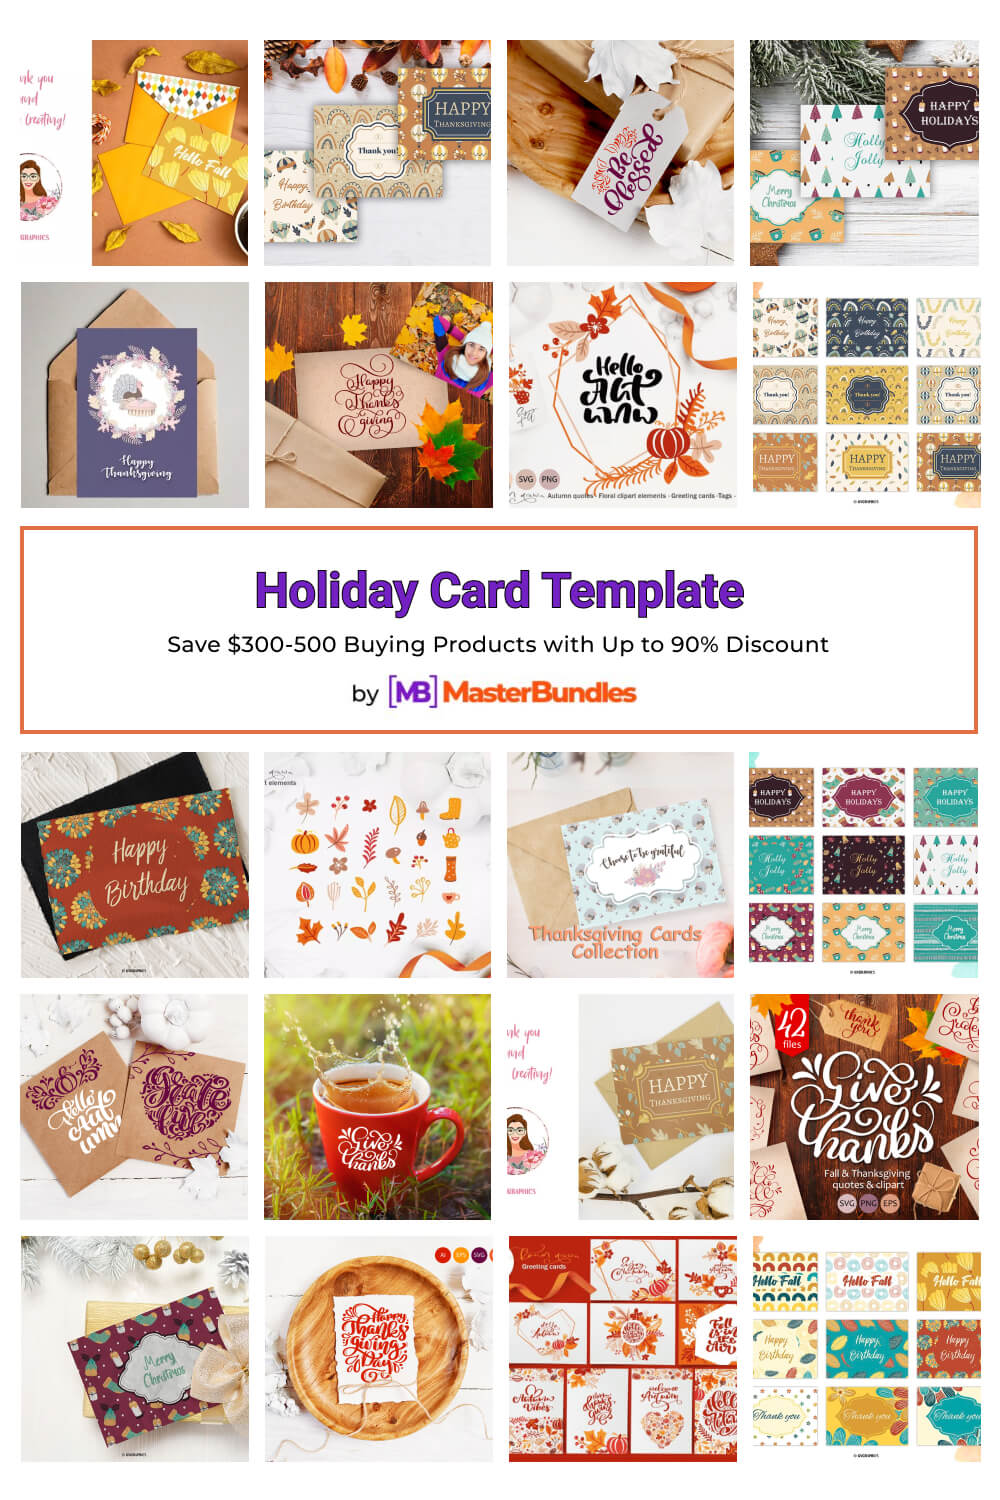 holiday card template pinterest image.